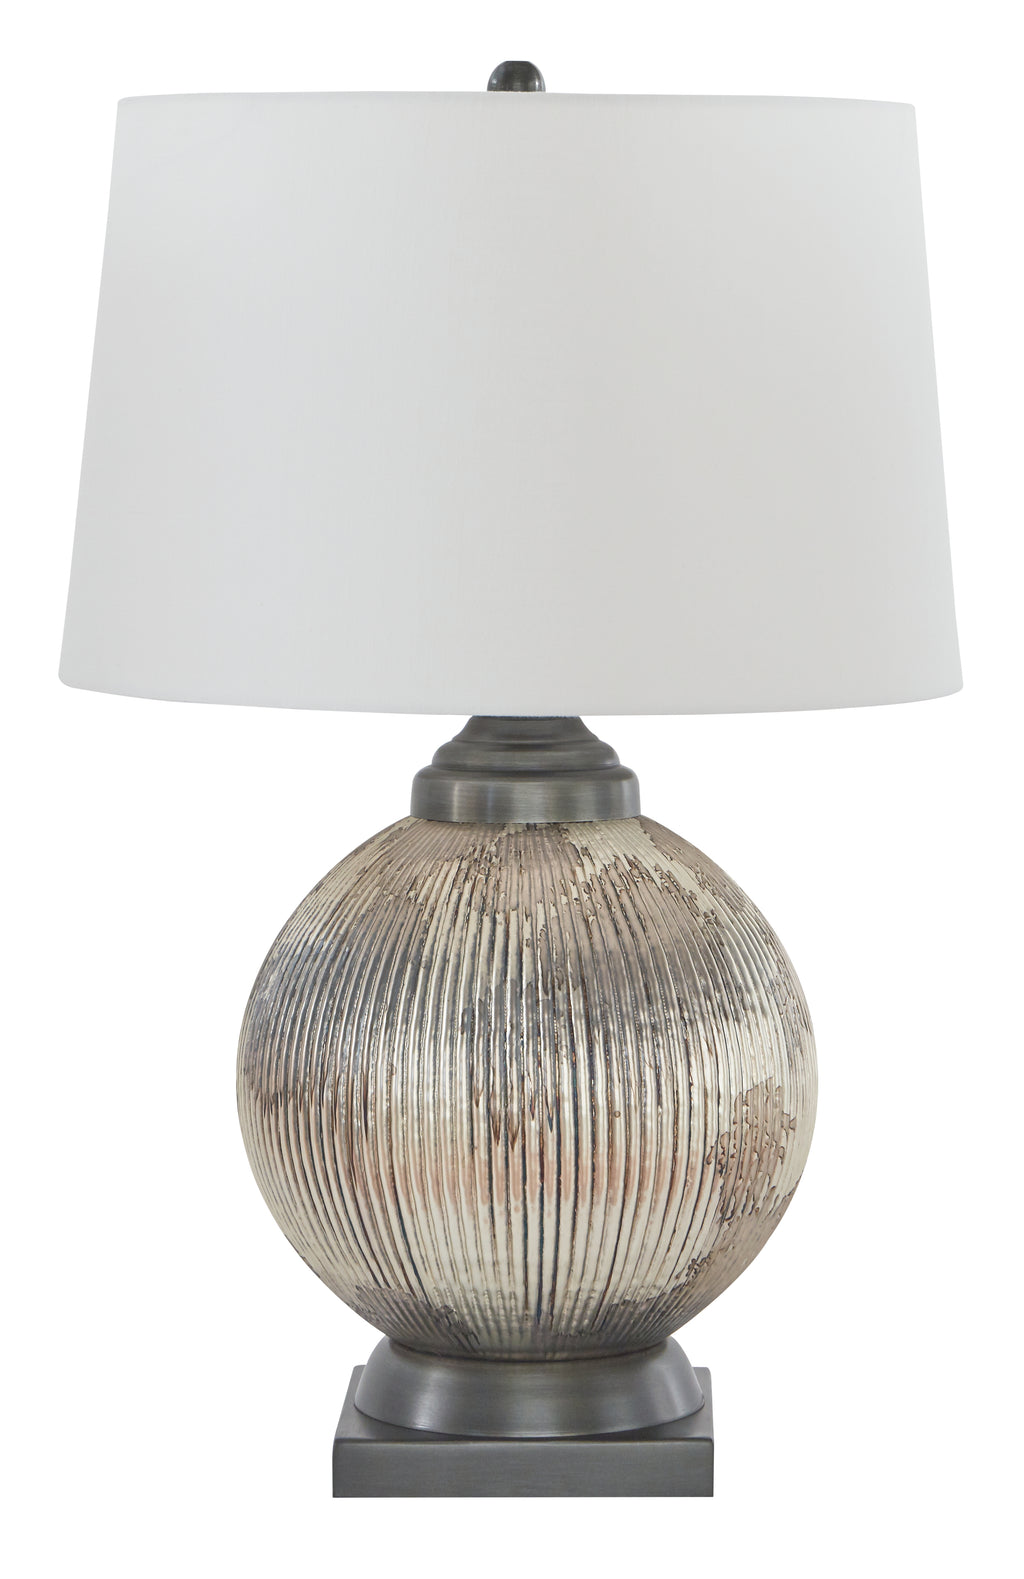 Cailan L430614 SilverBronze Finish Glass Table Lamp 1CN